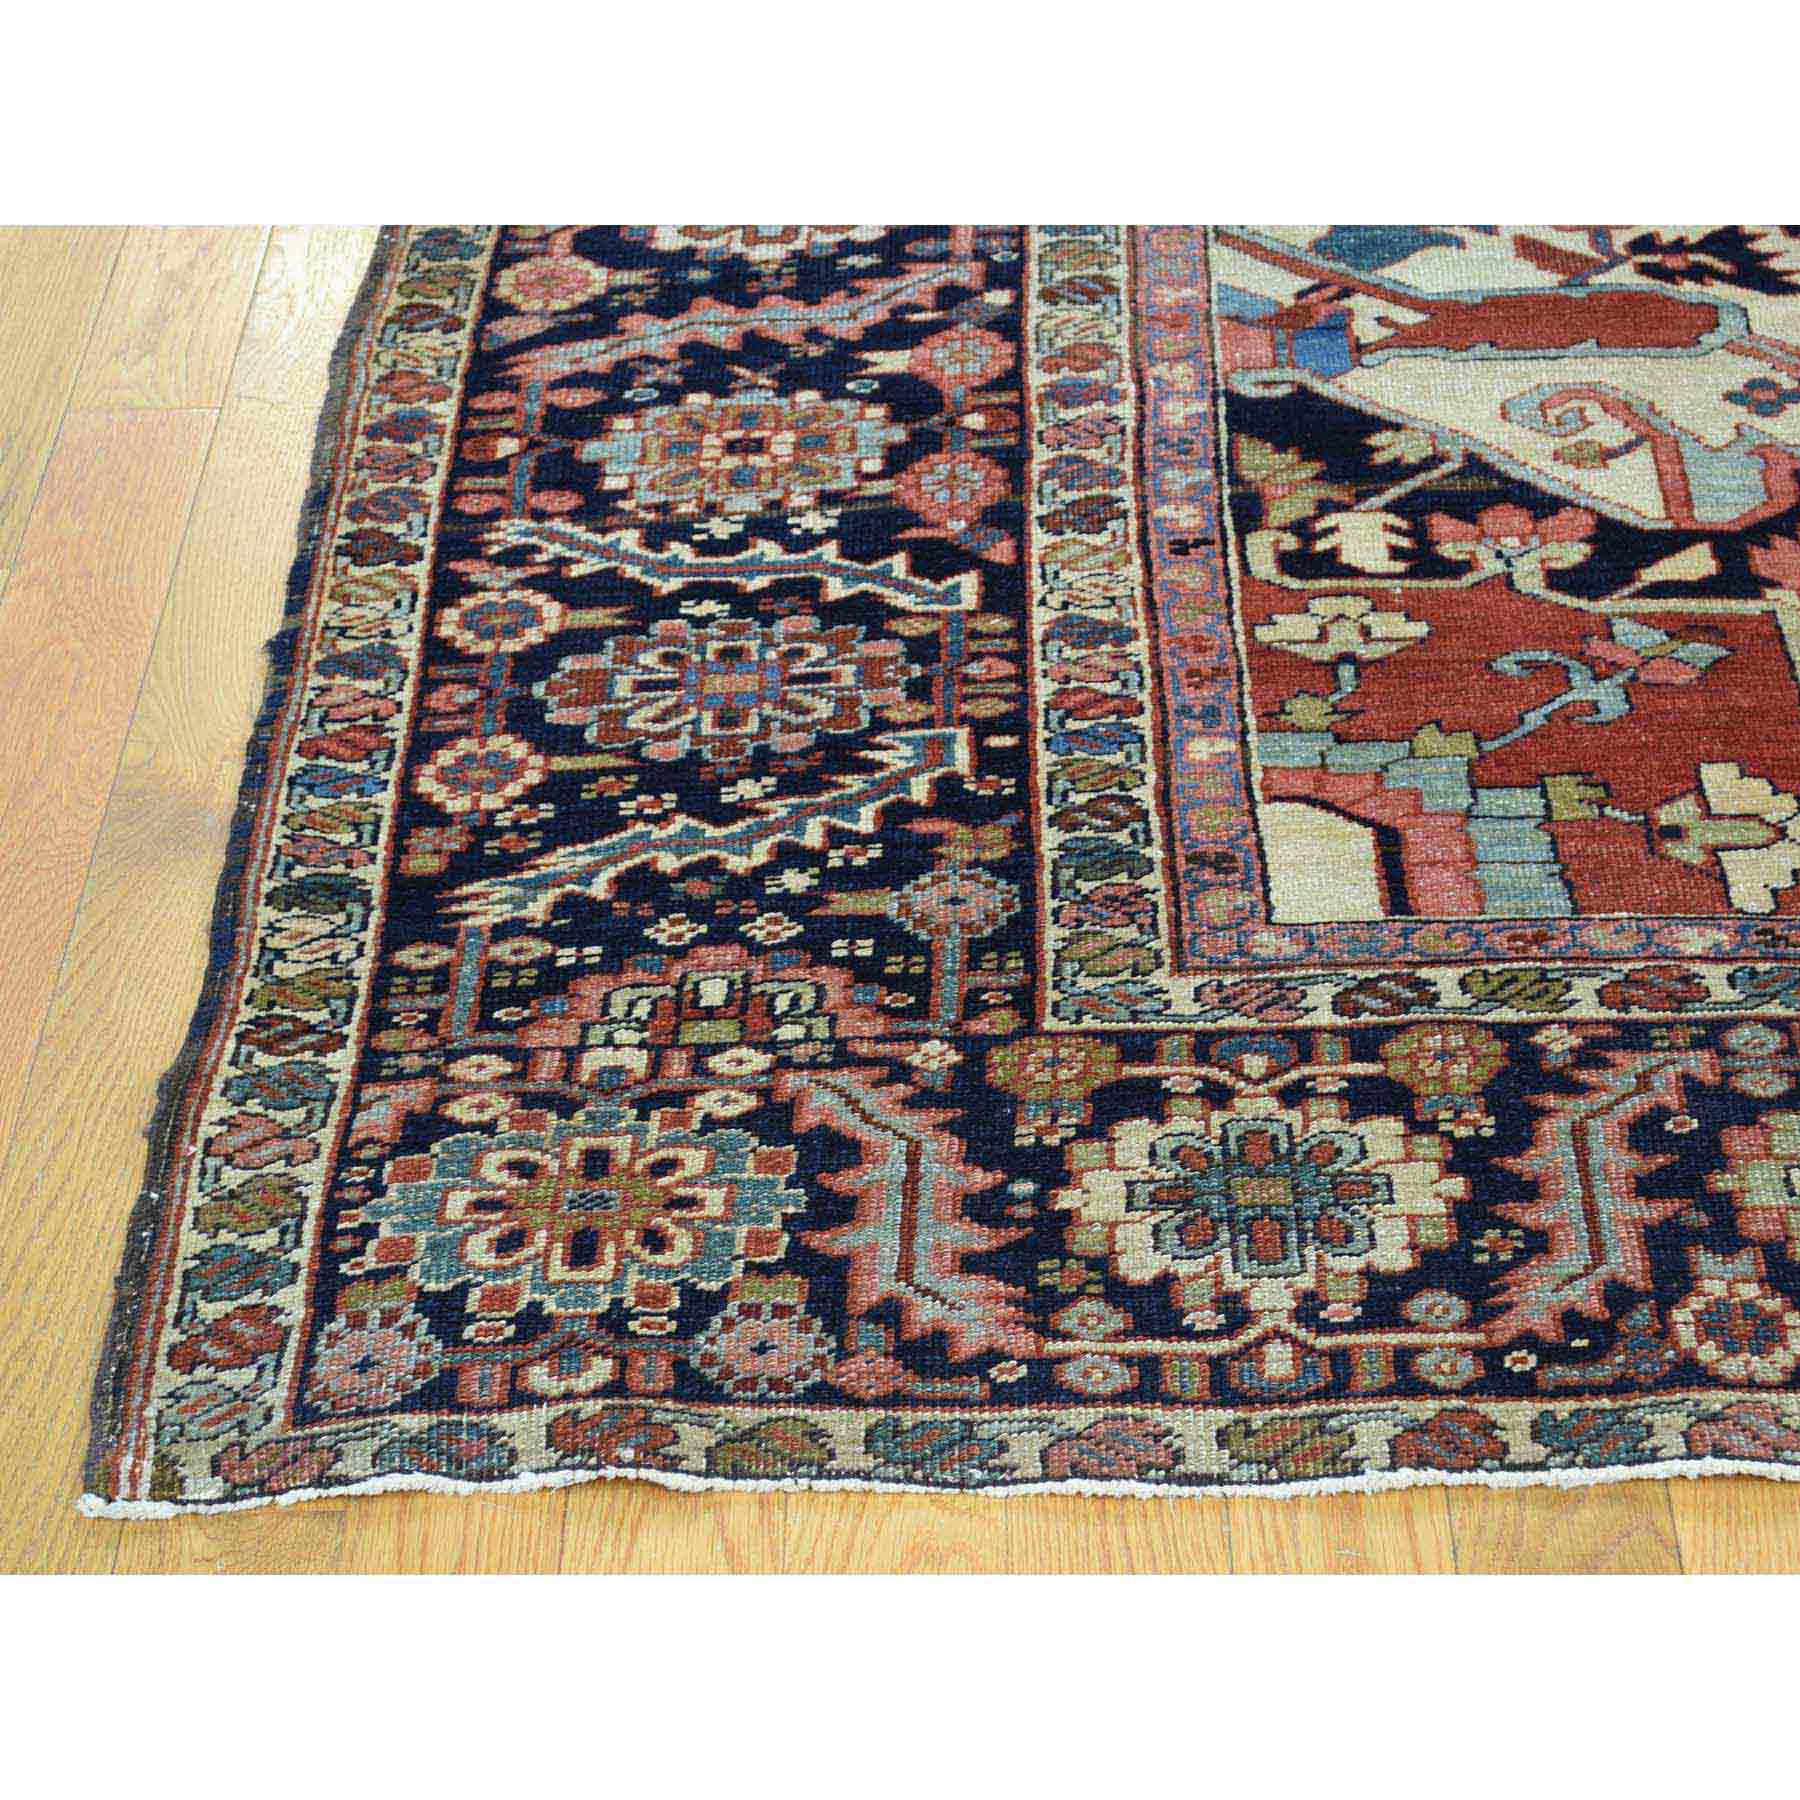 Antique-Hand-Knotted-Rug-173925